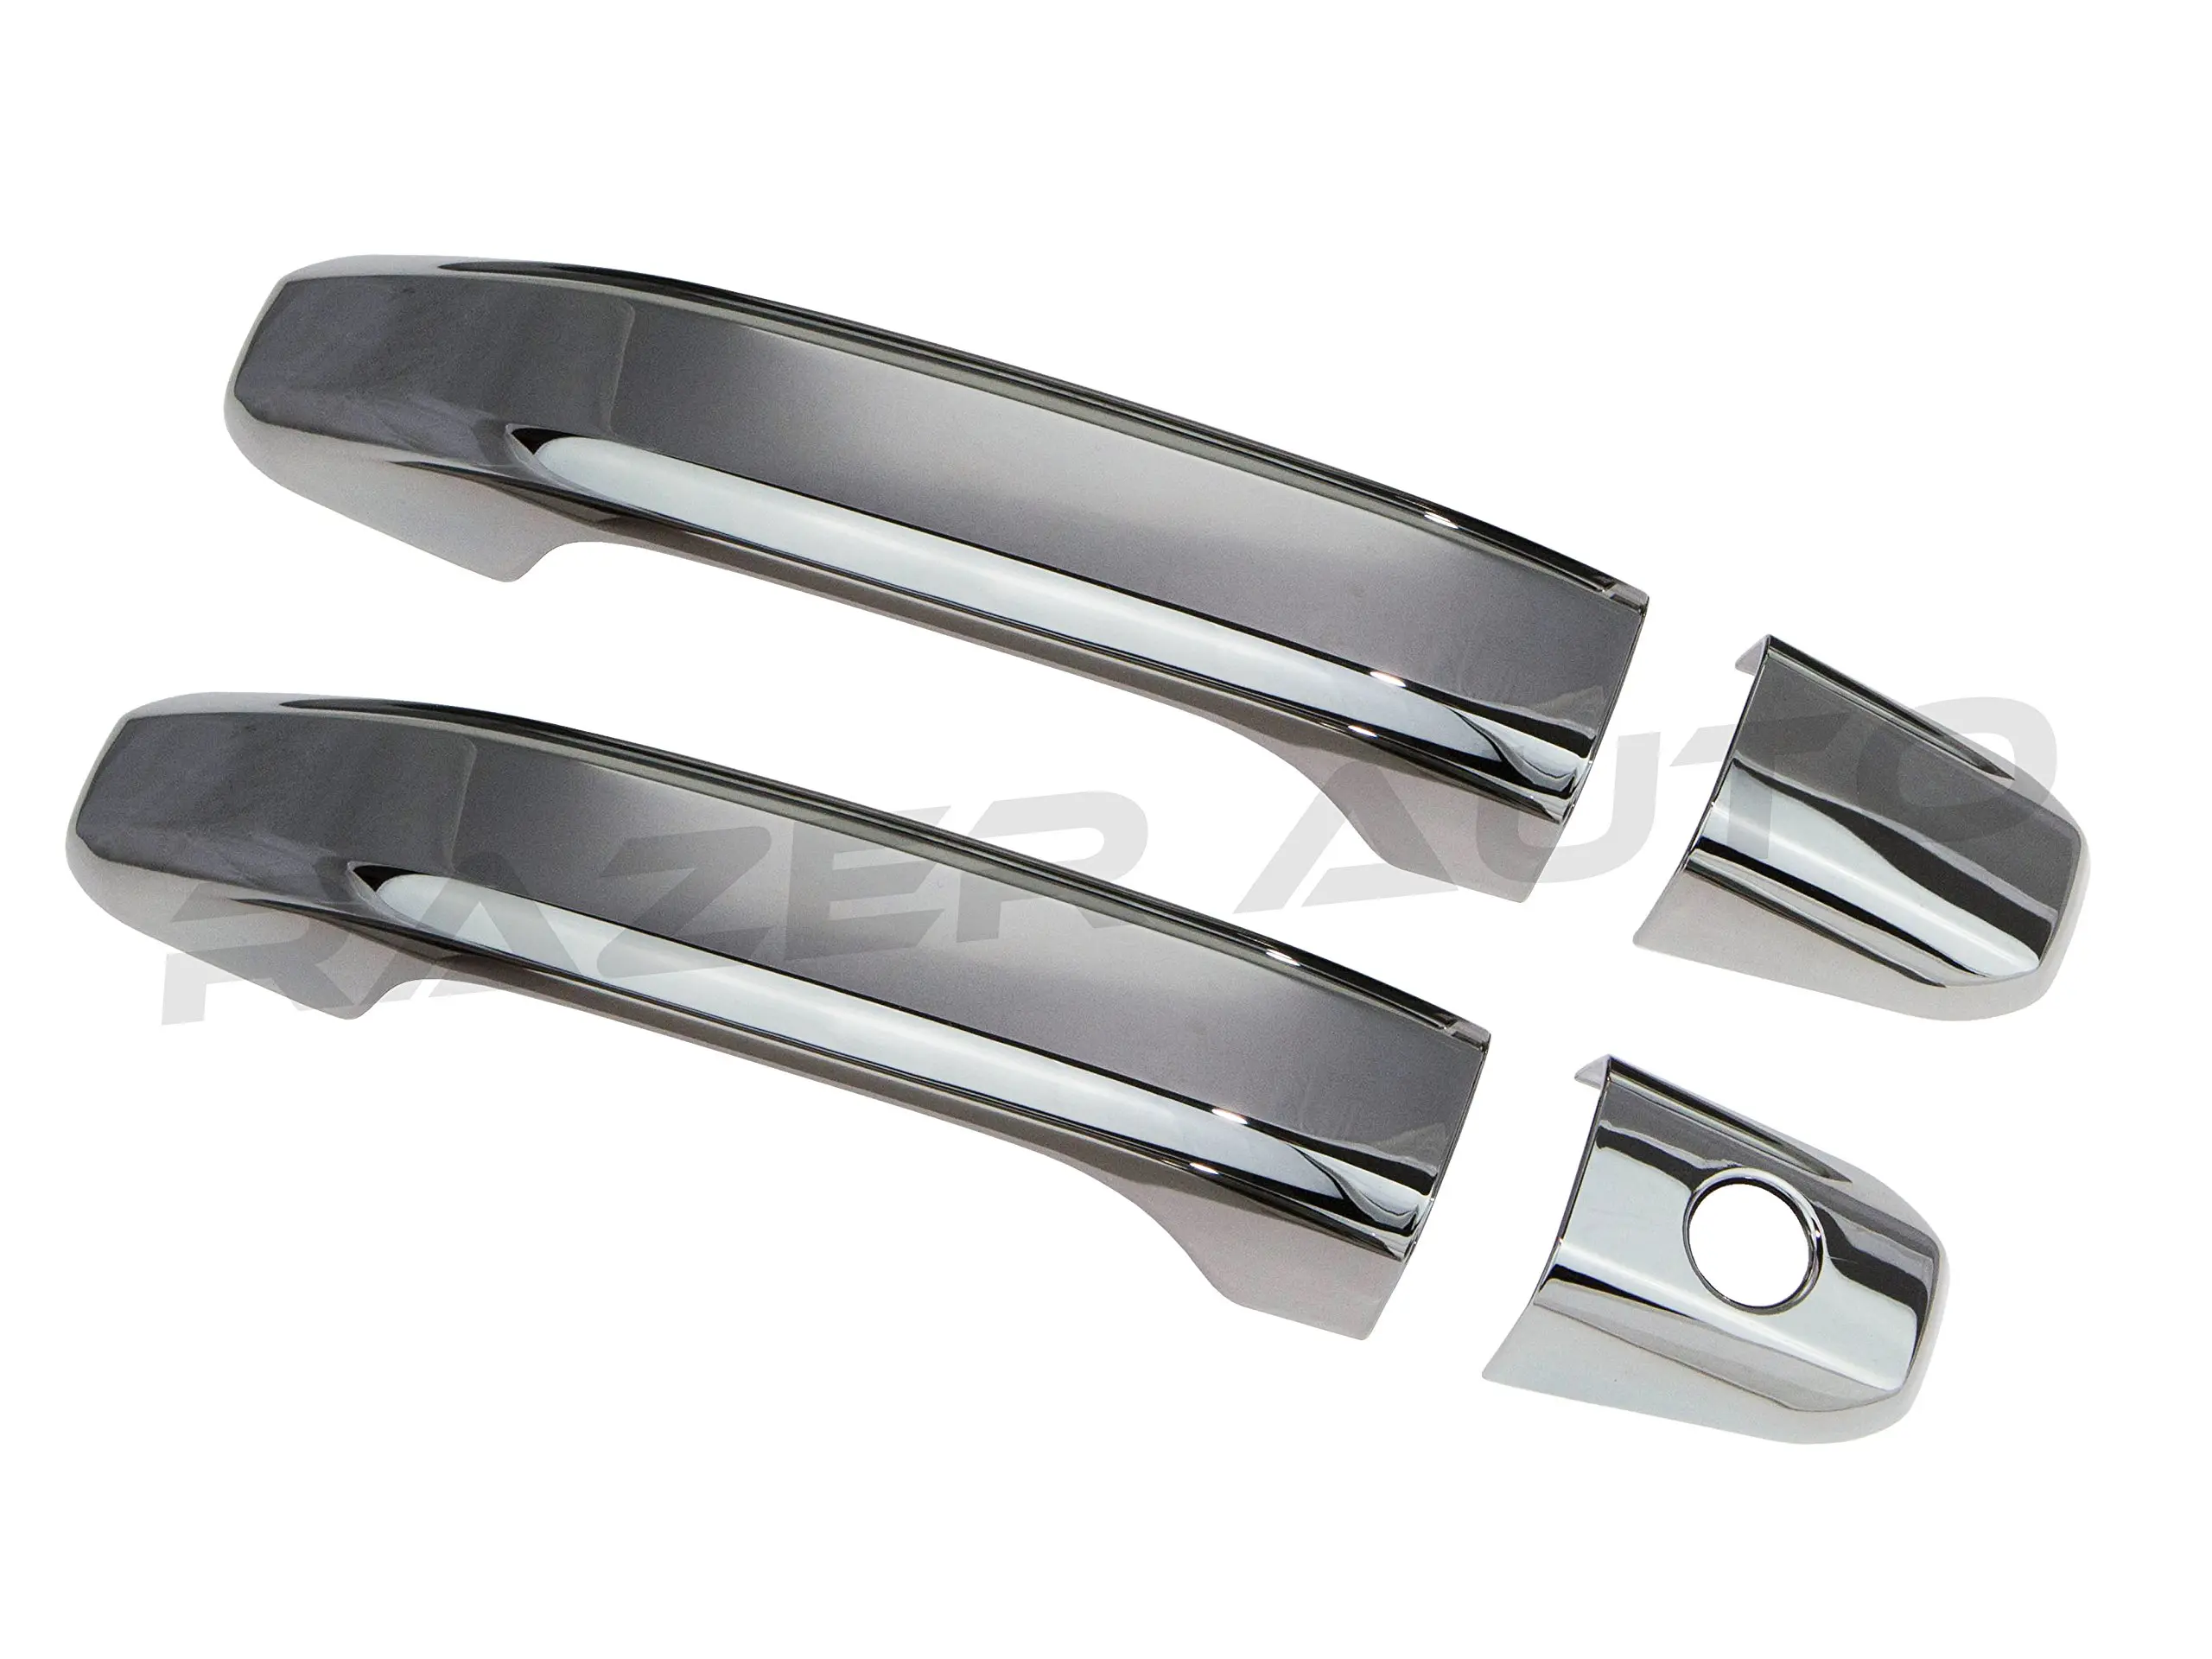 smoked chrome door handles - How do you clean tarnished chrome door handles